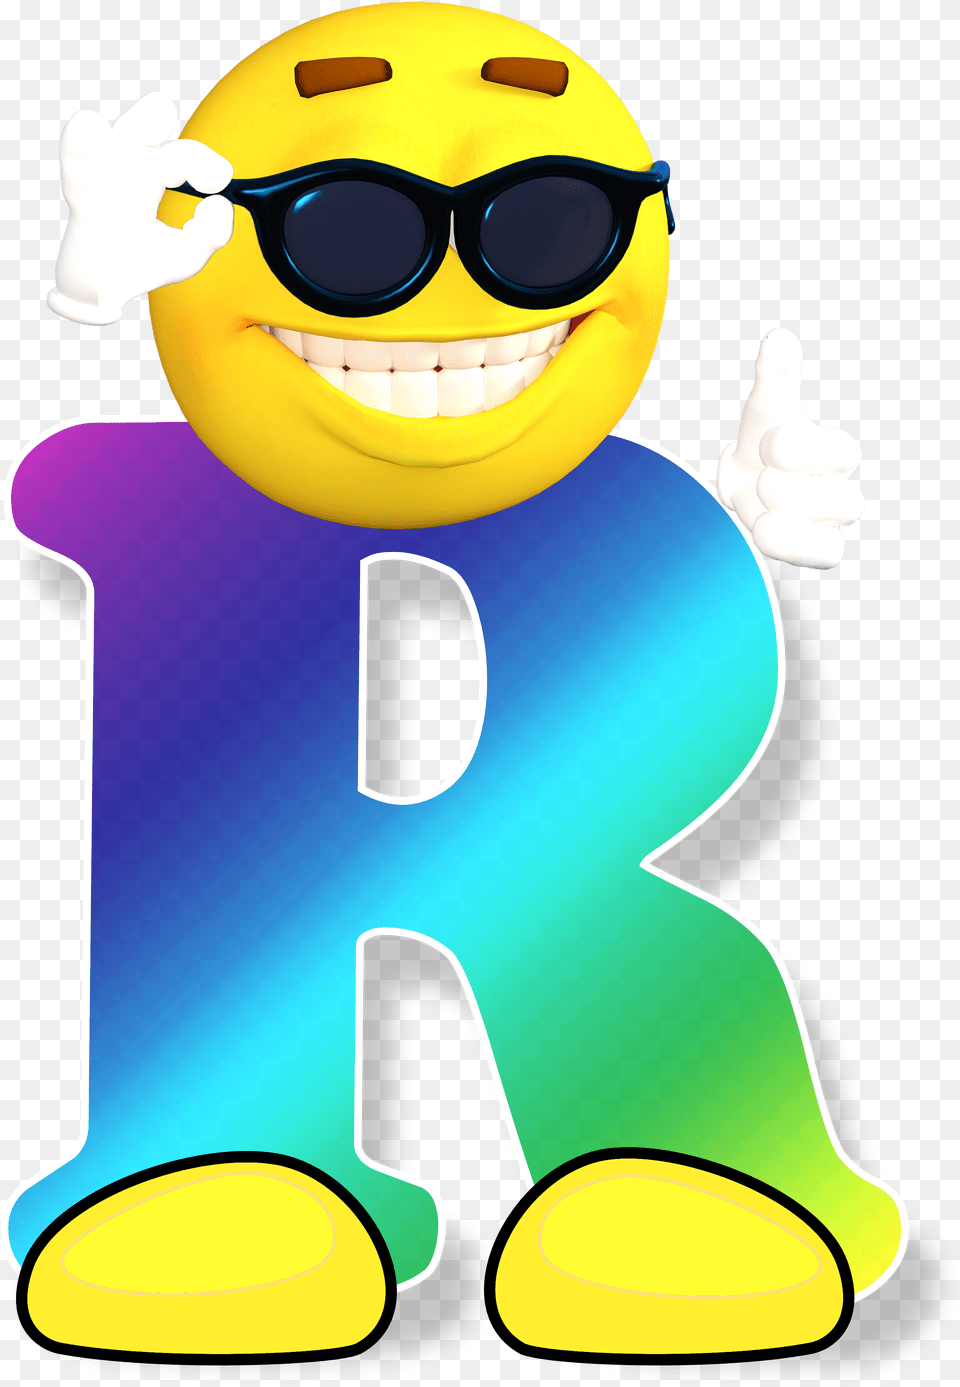 Letter R With Emoticon Face Abc Emoji Alphabet, Accessories, Glasses, Baby, Person Png